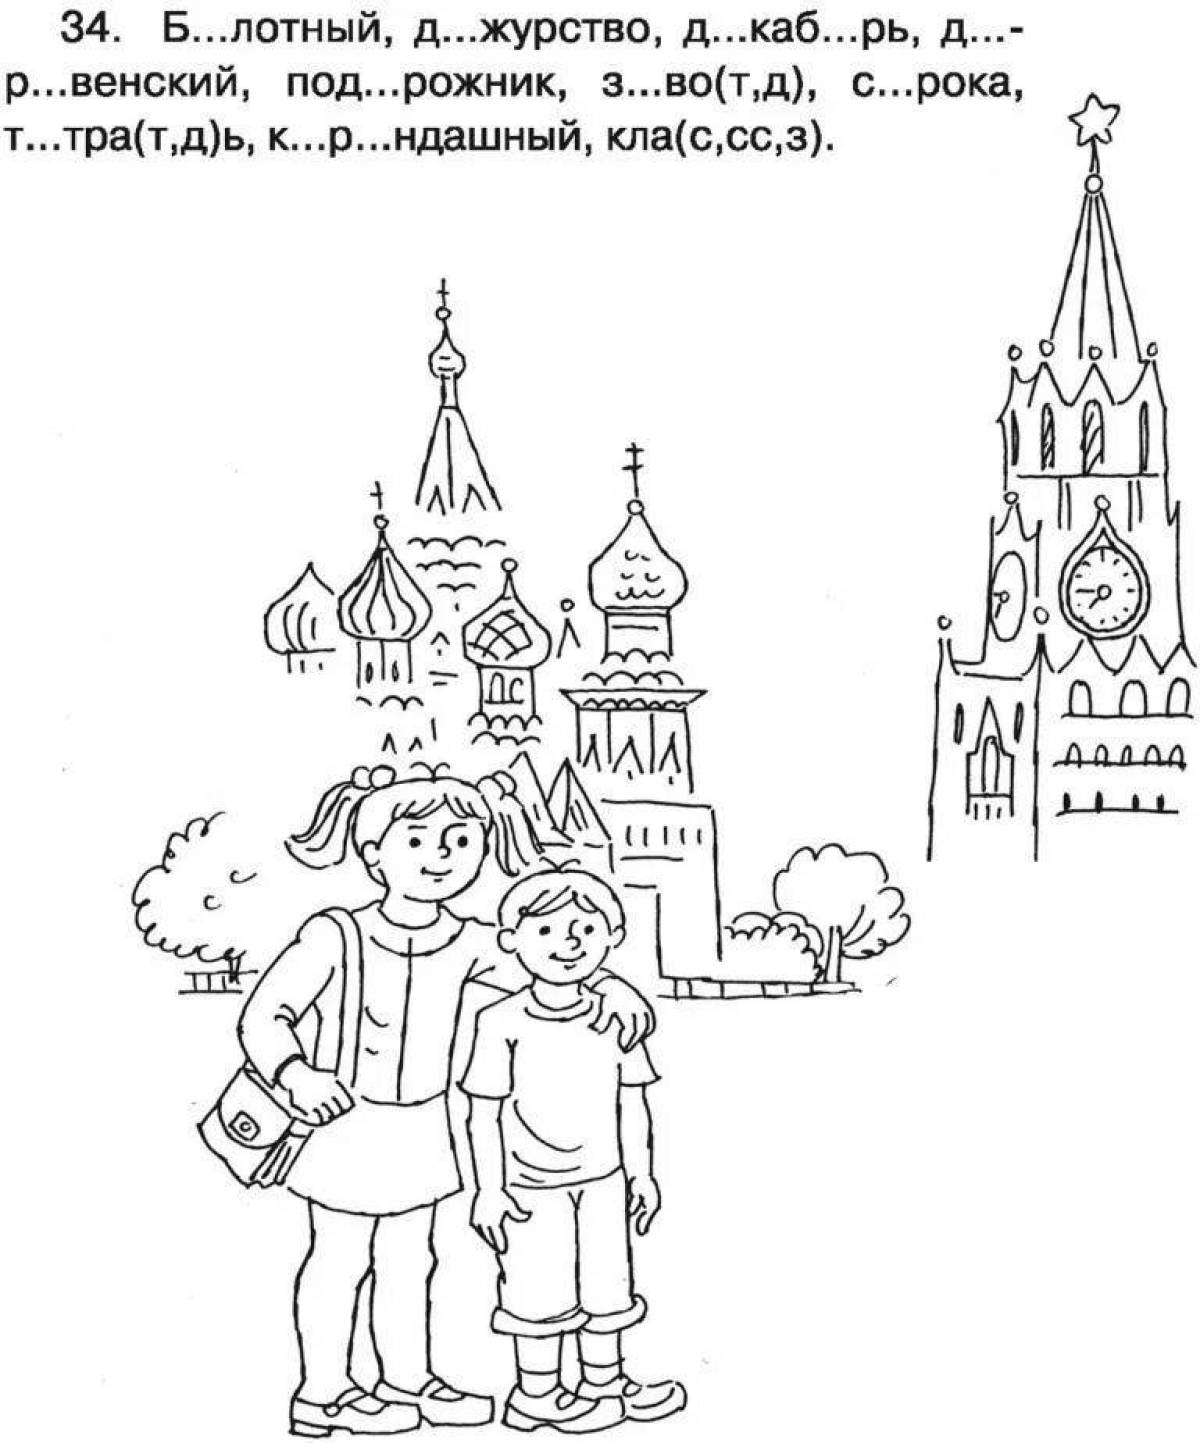 Coloring page of the word fun dictionary